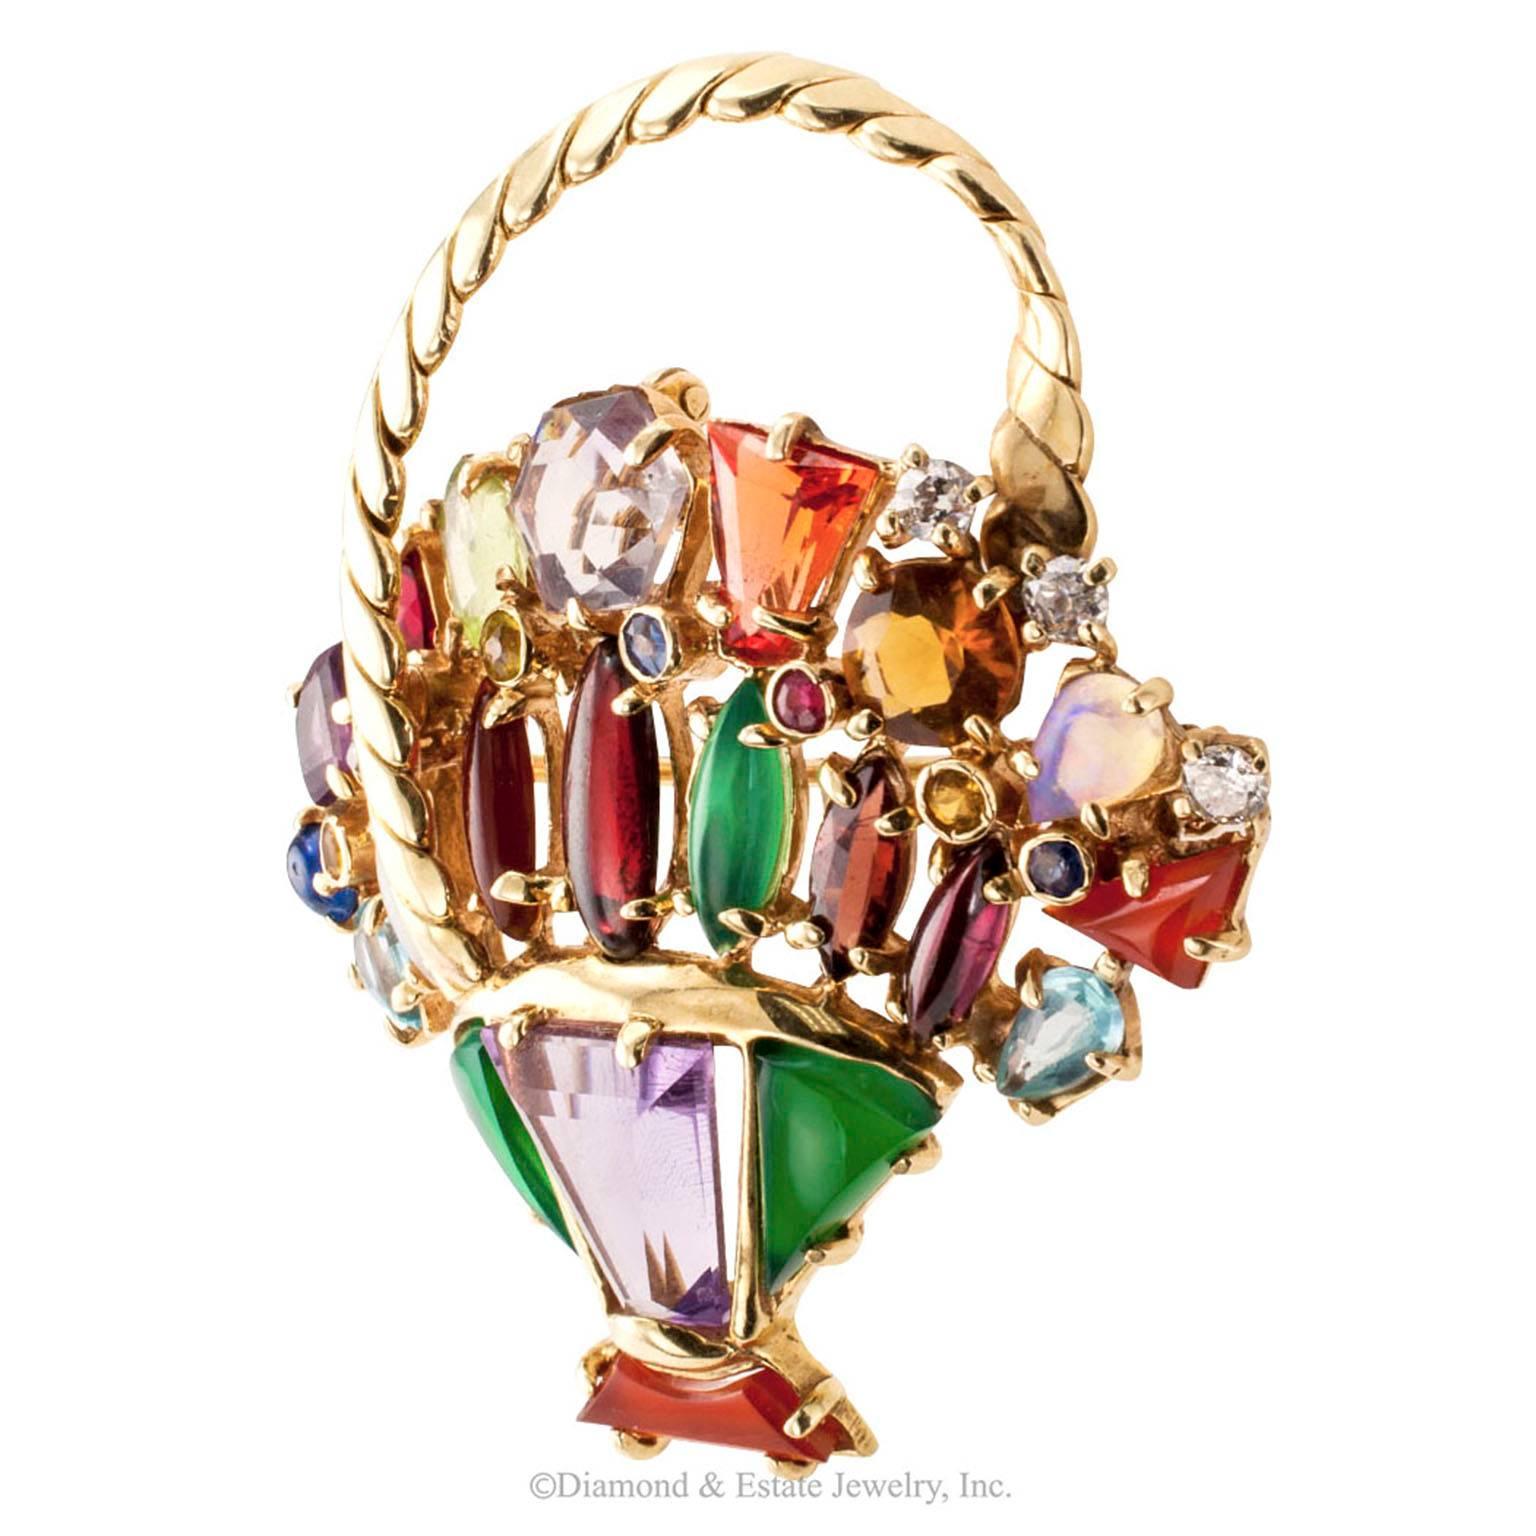 1950s Color Gemstone Diamond Gold Basket Brooch/Pendant

Mid-century multi color gemstone and 14-karat yellow gold basket brooch/pendant.  The design incorporates a wide range of gemstones to produce an effect resembling a basket of flowers. The